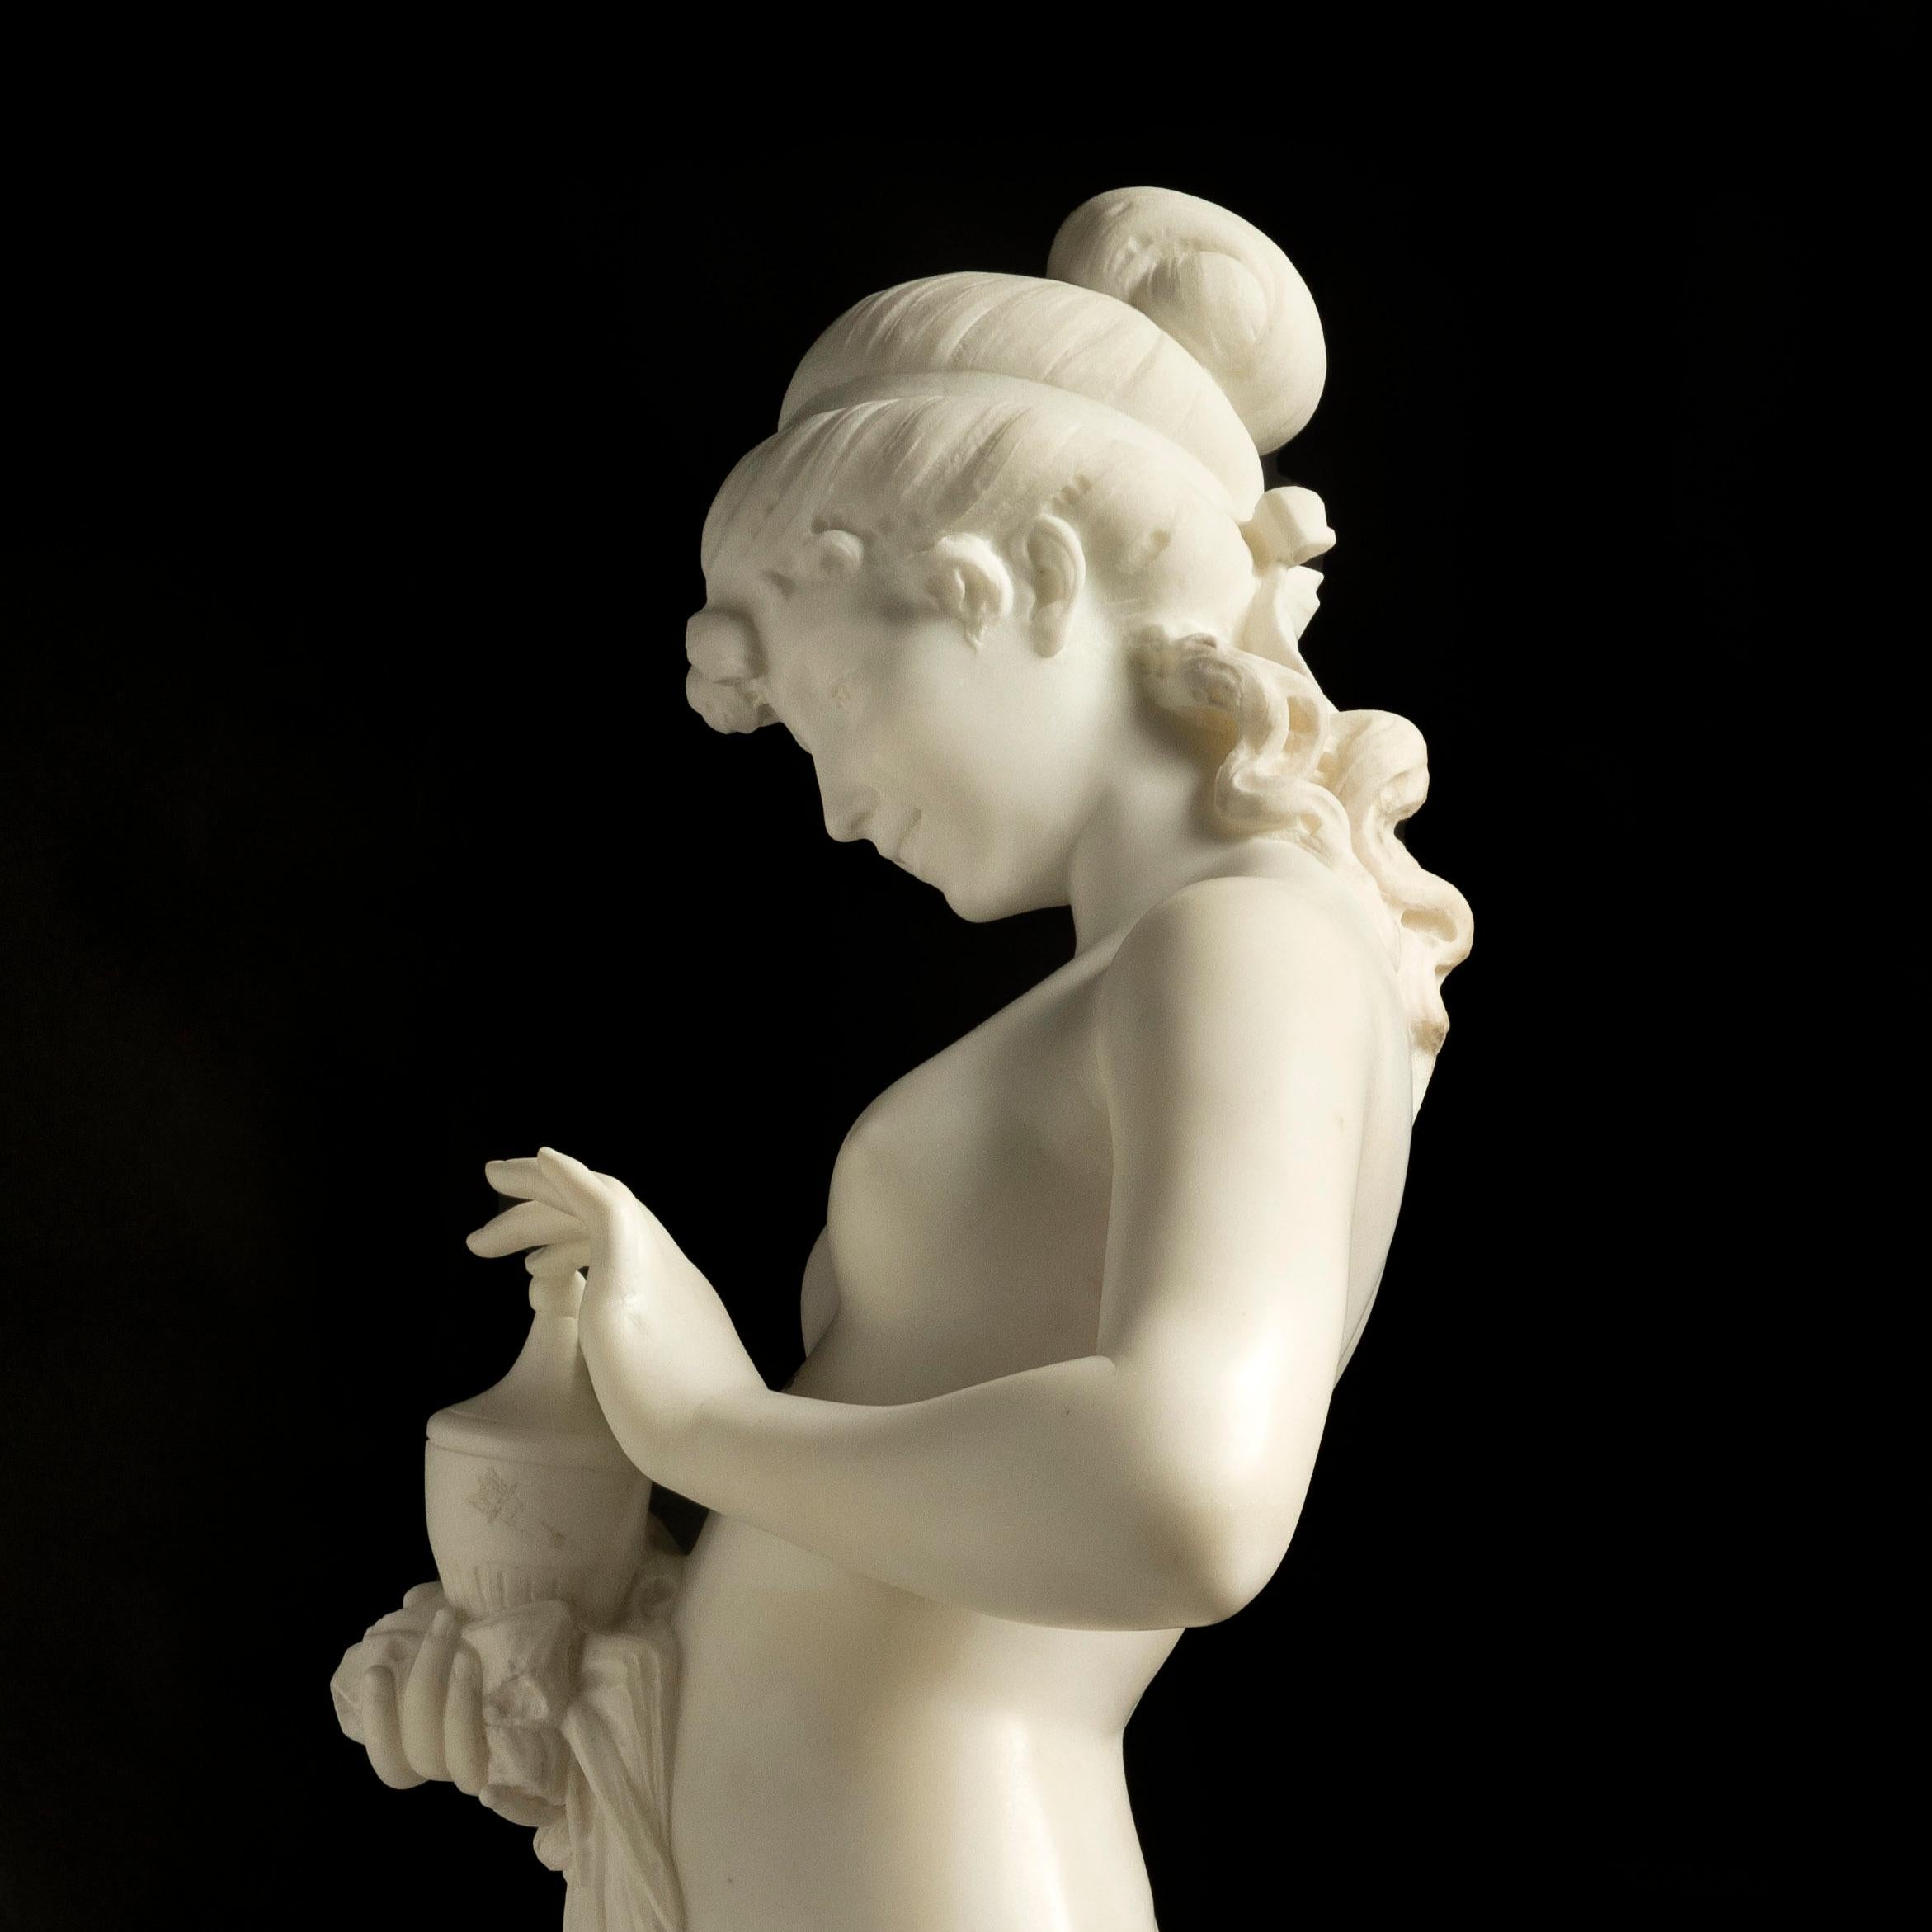 Statuary Marble 19th Century Italian Nearly Life-Size Marble Sculpture of Pandora by F. Andreini For Sale